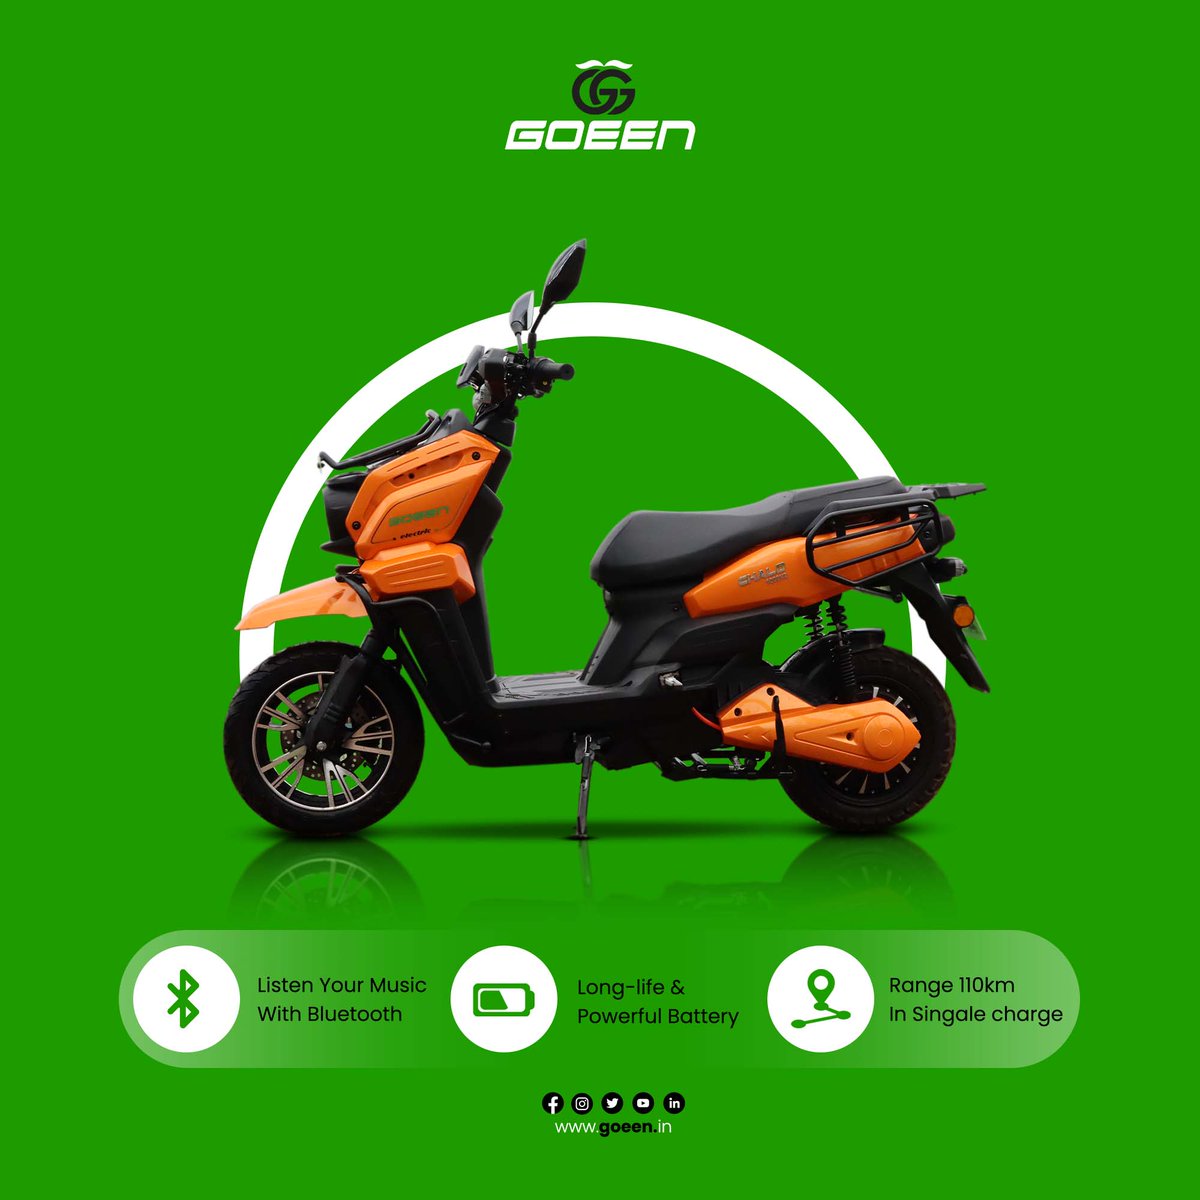 Ride the Future: CHALO 1000 V2 (electric scooter)
#goeenelectric #goeen #greenenergy#smartvehicles #electricscooter #chalo1000v2